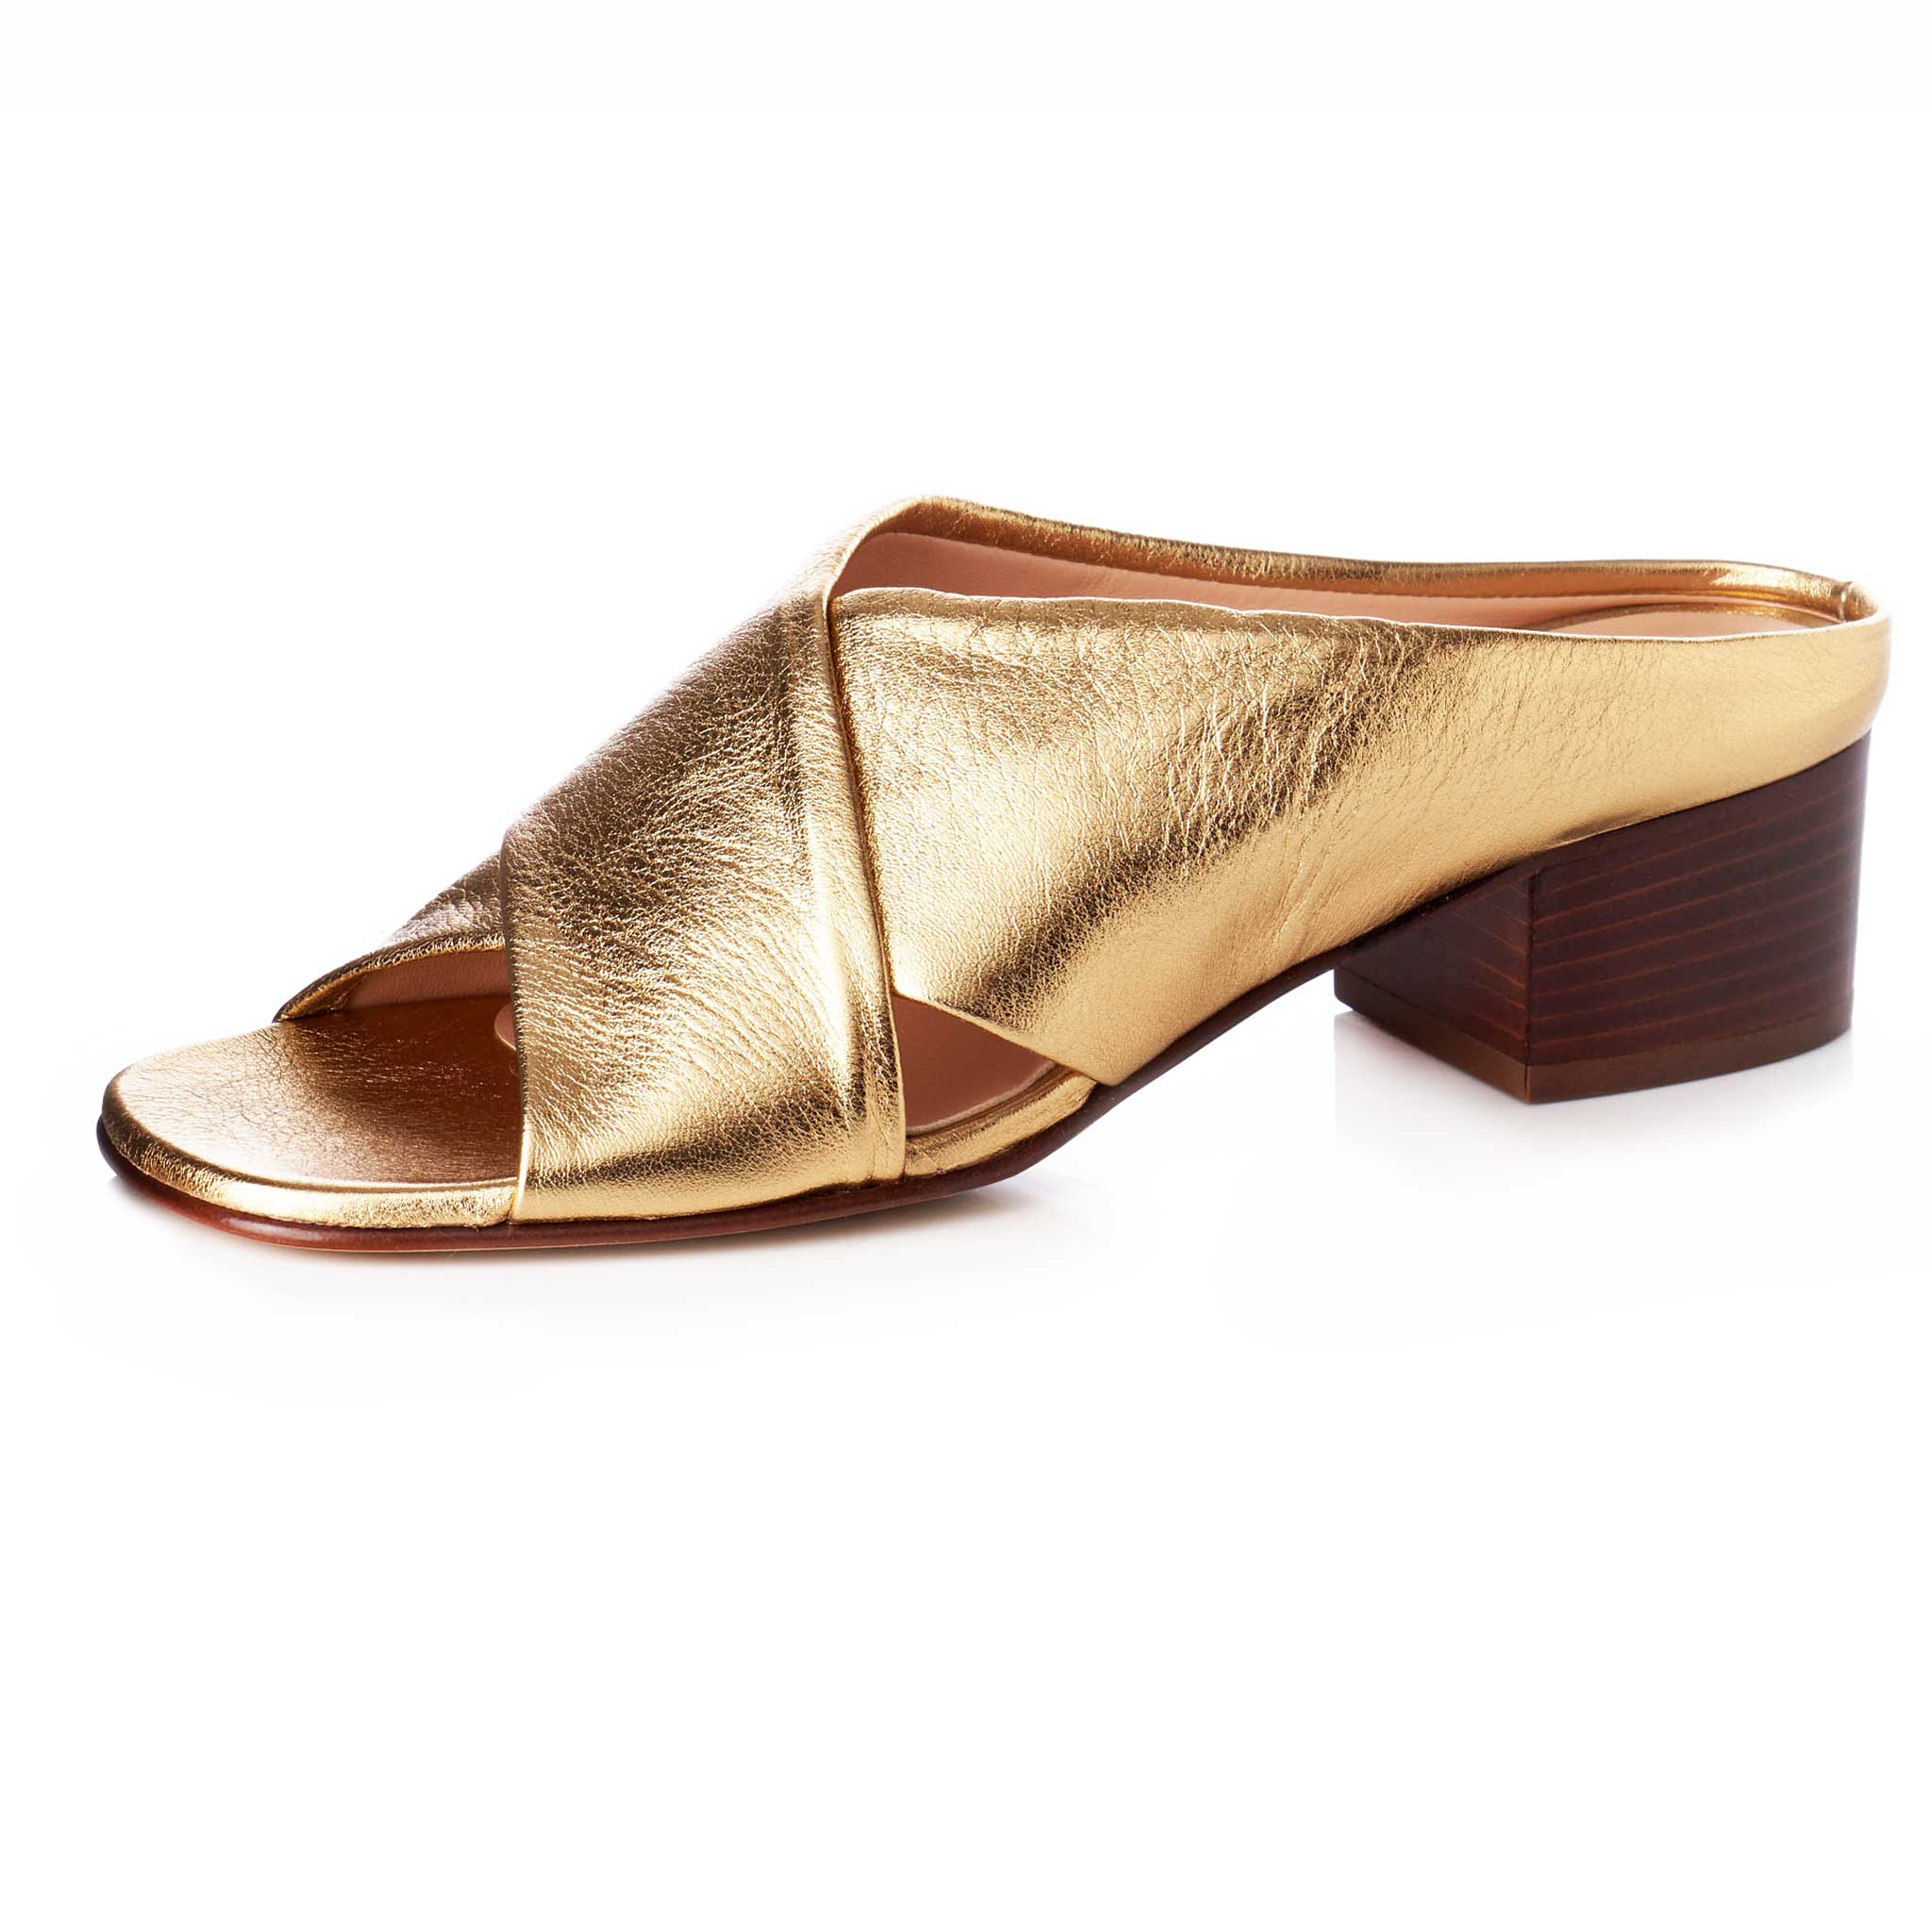 gold bronze soft crinkle leather italian heels plain with straps that cross over foot. two inch stacked wood heel.